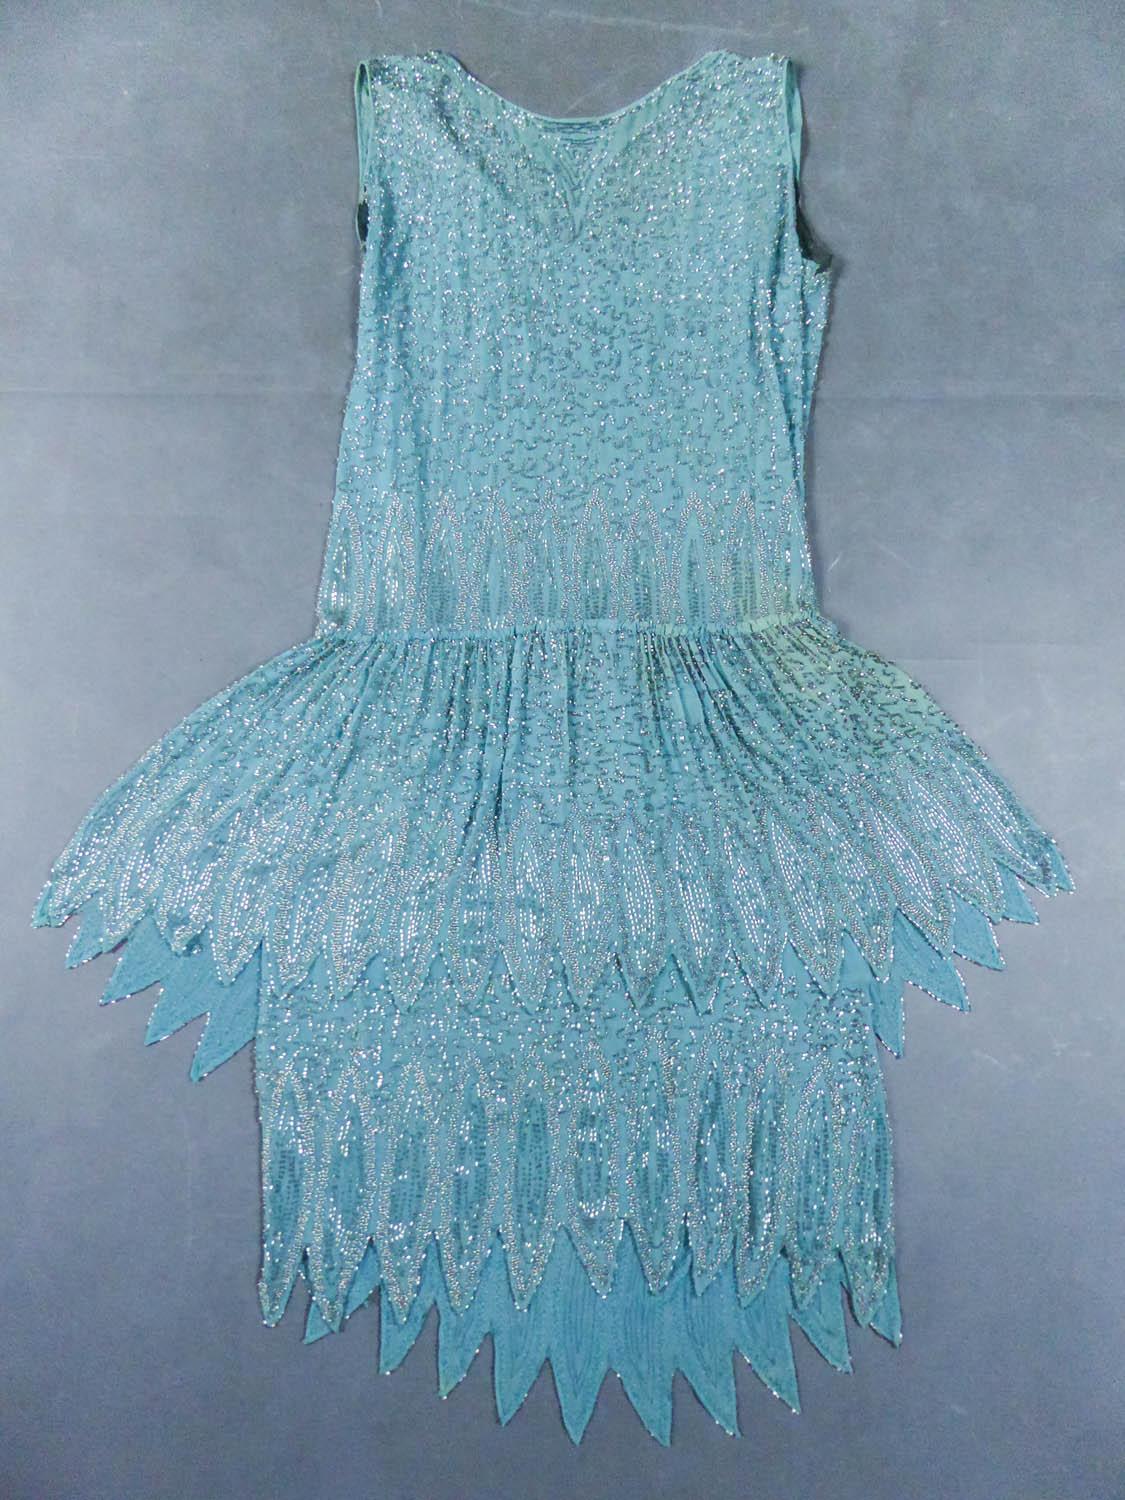 Circa 1920
France

Charleston Ball gown in turquoise silk muslin embroidered with silver tubular beads from the 1920s. Background in muslin embroidered with translucent silver and iridescent pearls in decor with vermicule. Round collar with